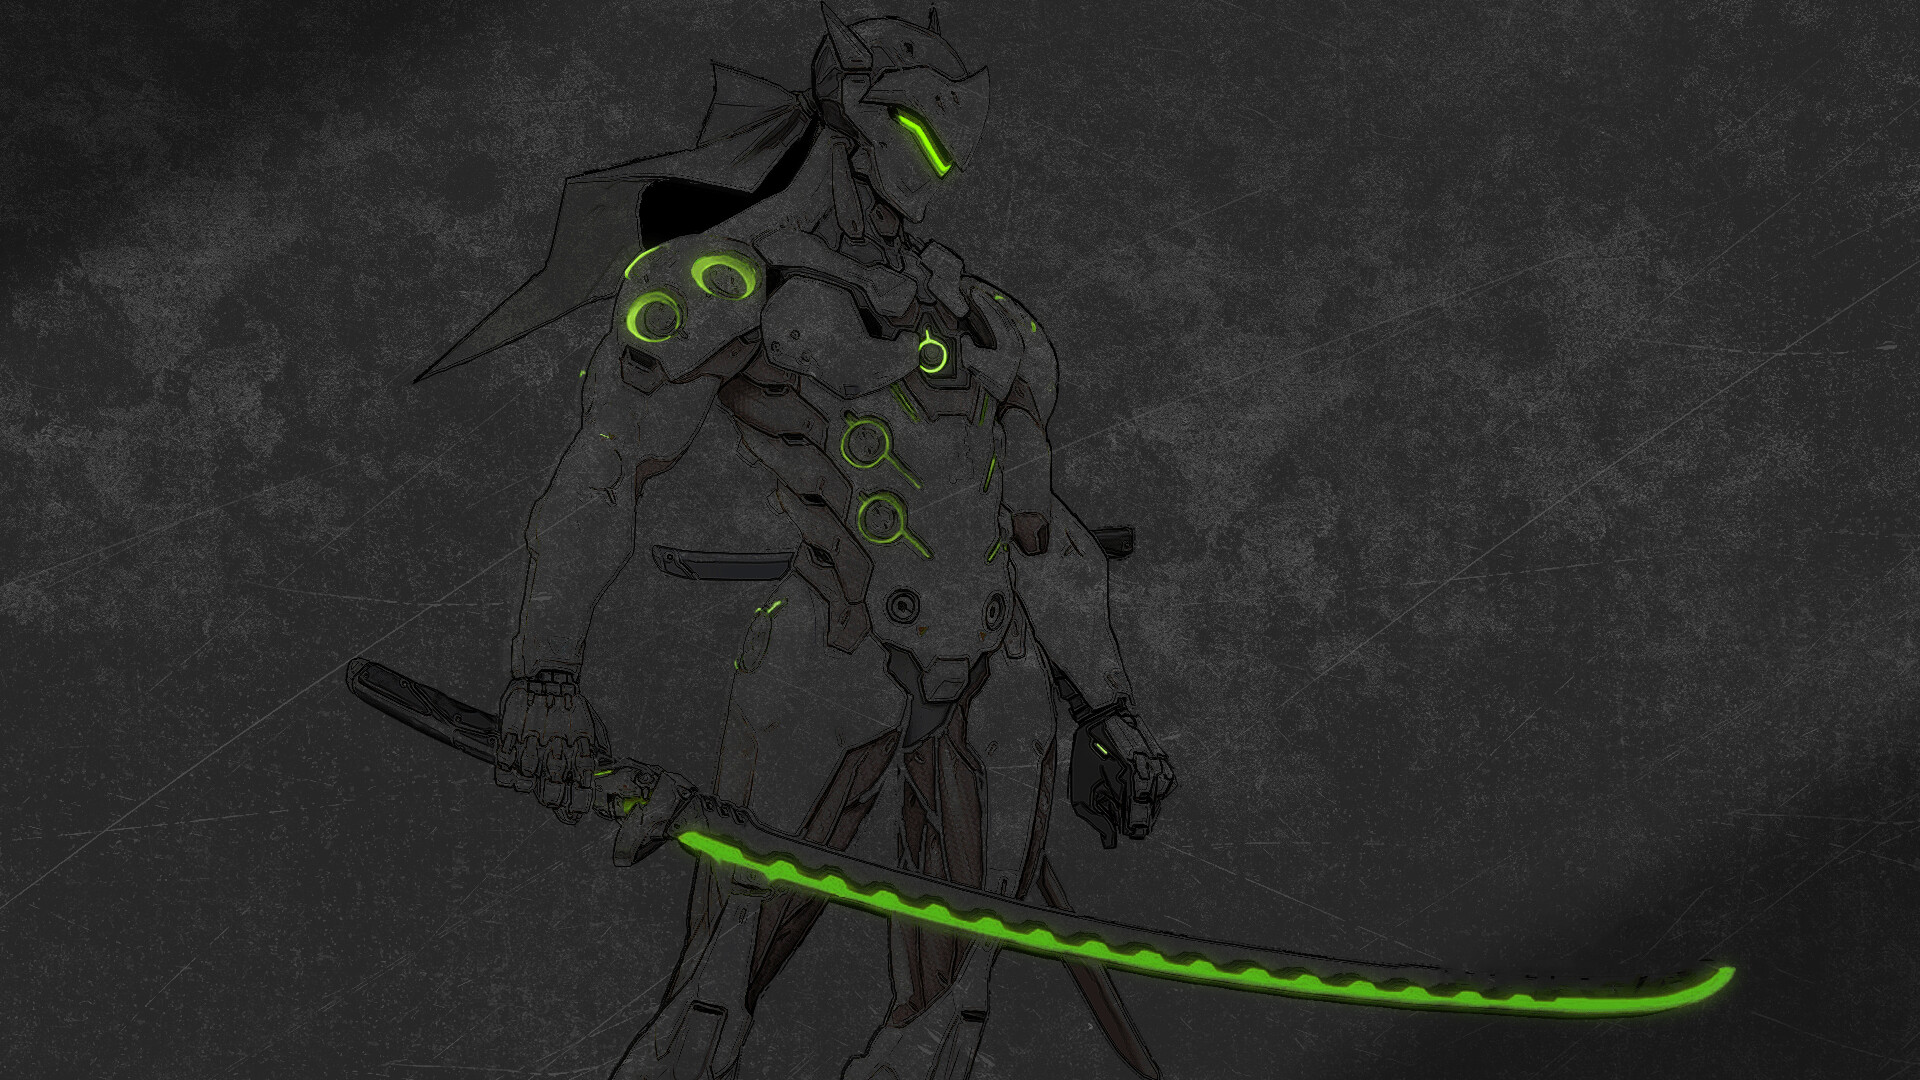 Genji: With secondary fire quickly throws three shurikens in a cone in front of him. 1920x1080 Full HD Wallpaper.